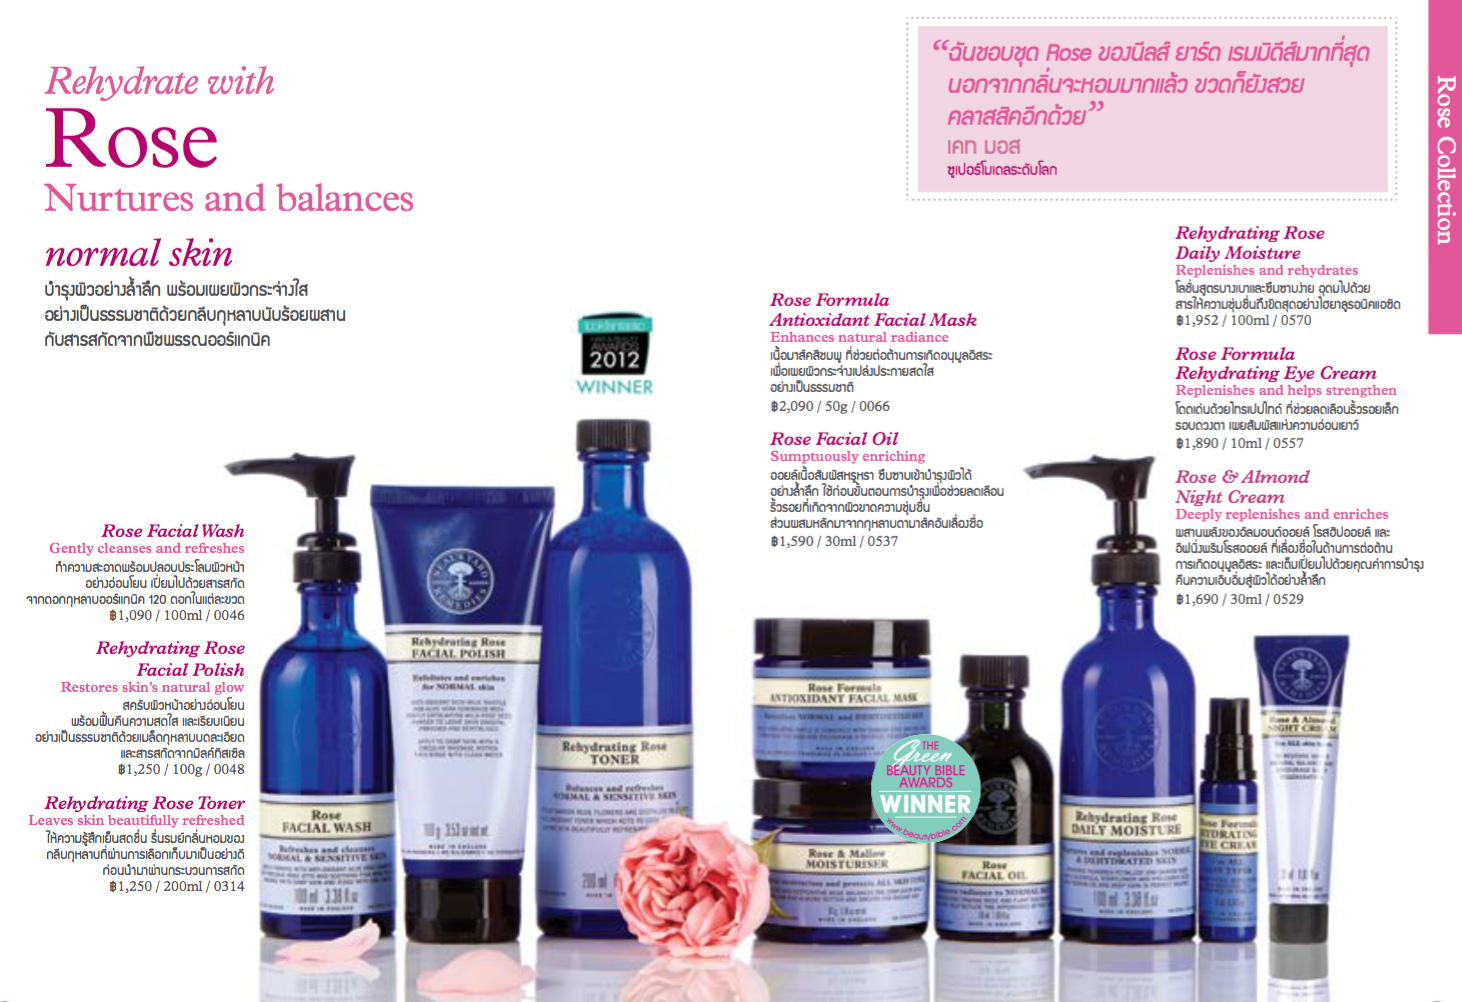 Neal's Yard Remedies Rose Collection